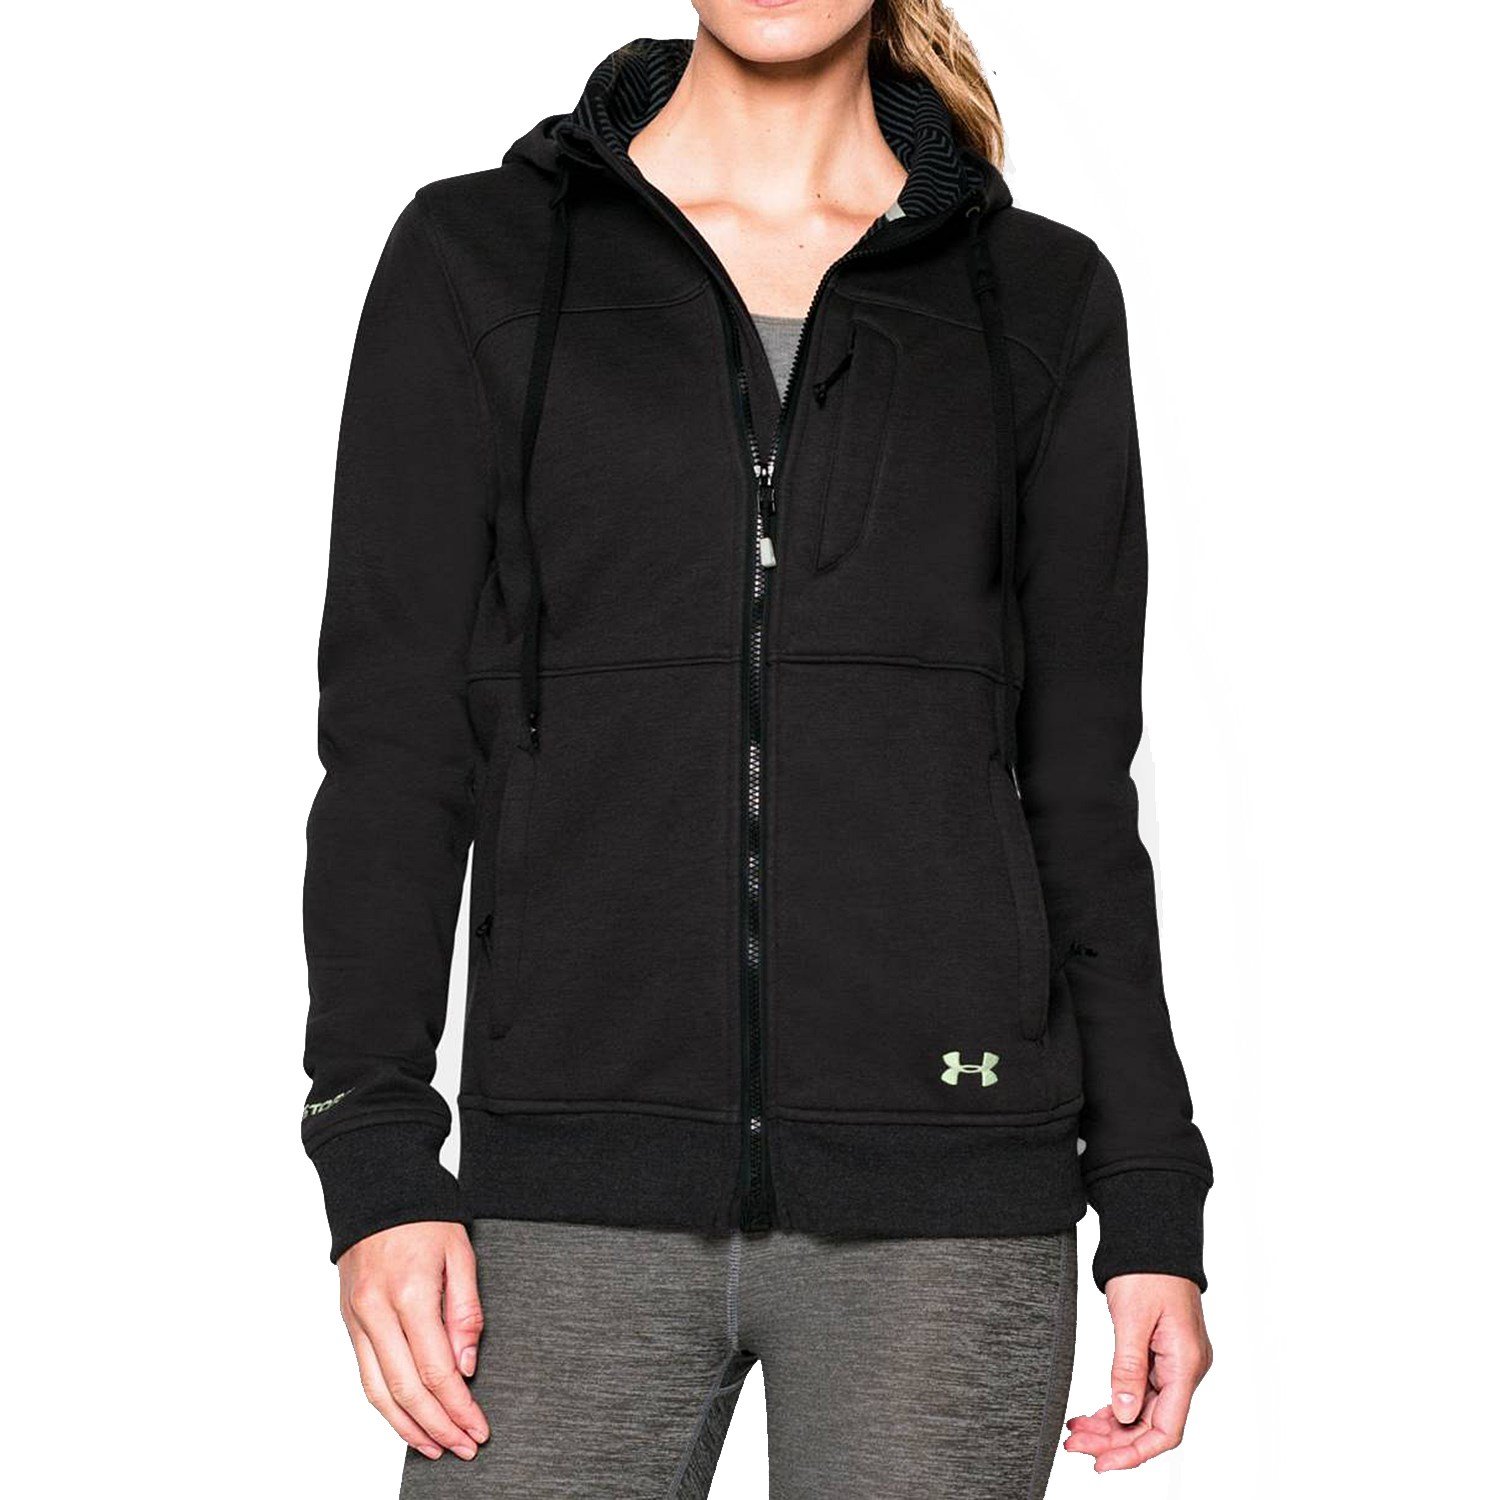 under armour dobson softshell jacket womens